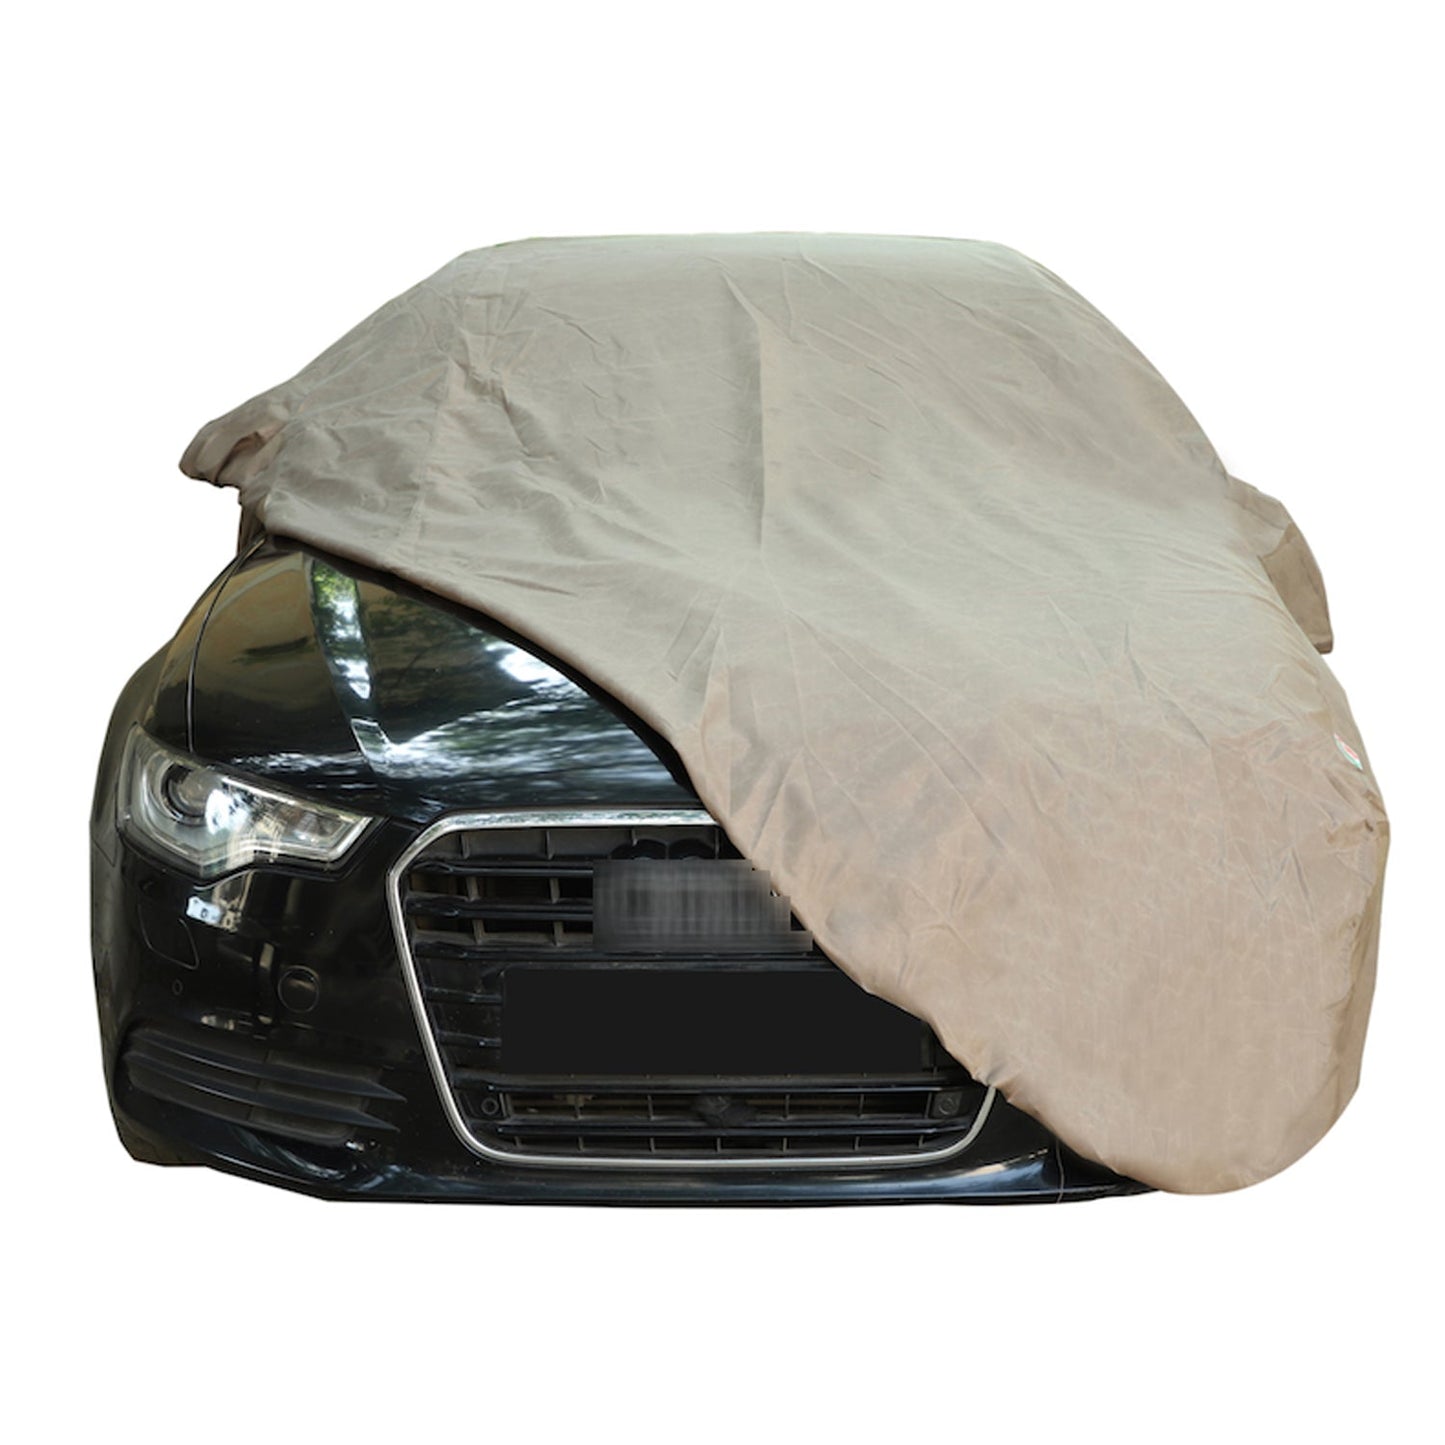 Oshotto Brown 100% Waterproof Car Body Cover with Mirror Pockets For Volkswagen Vento